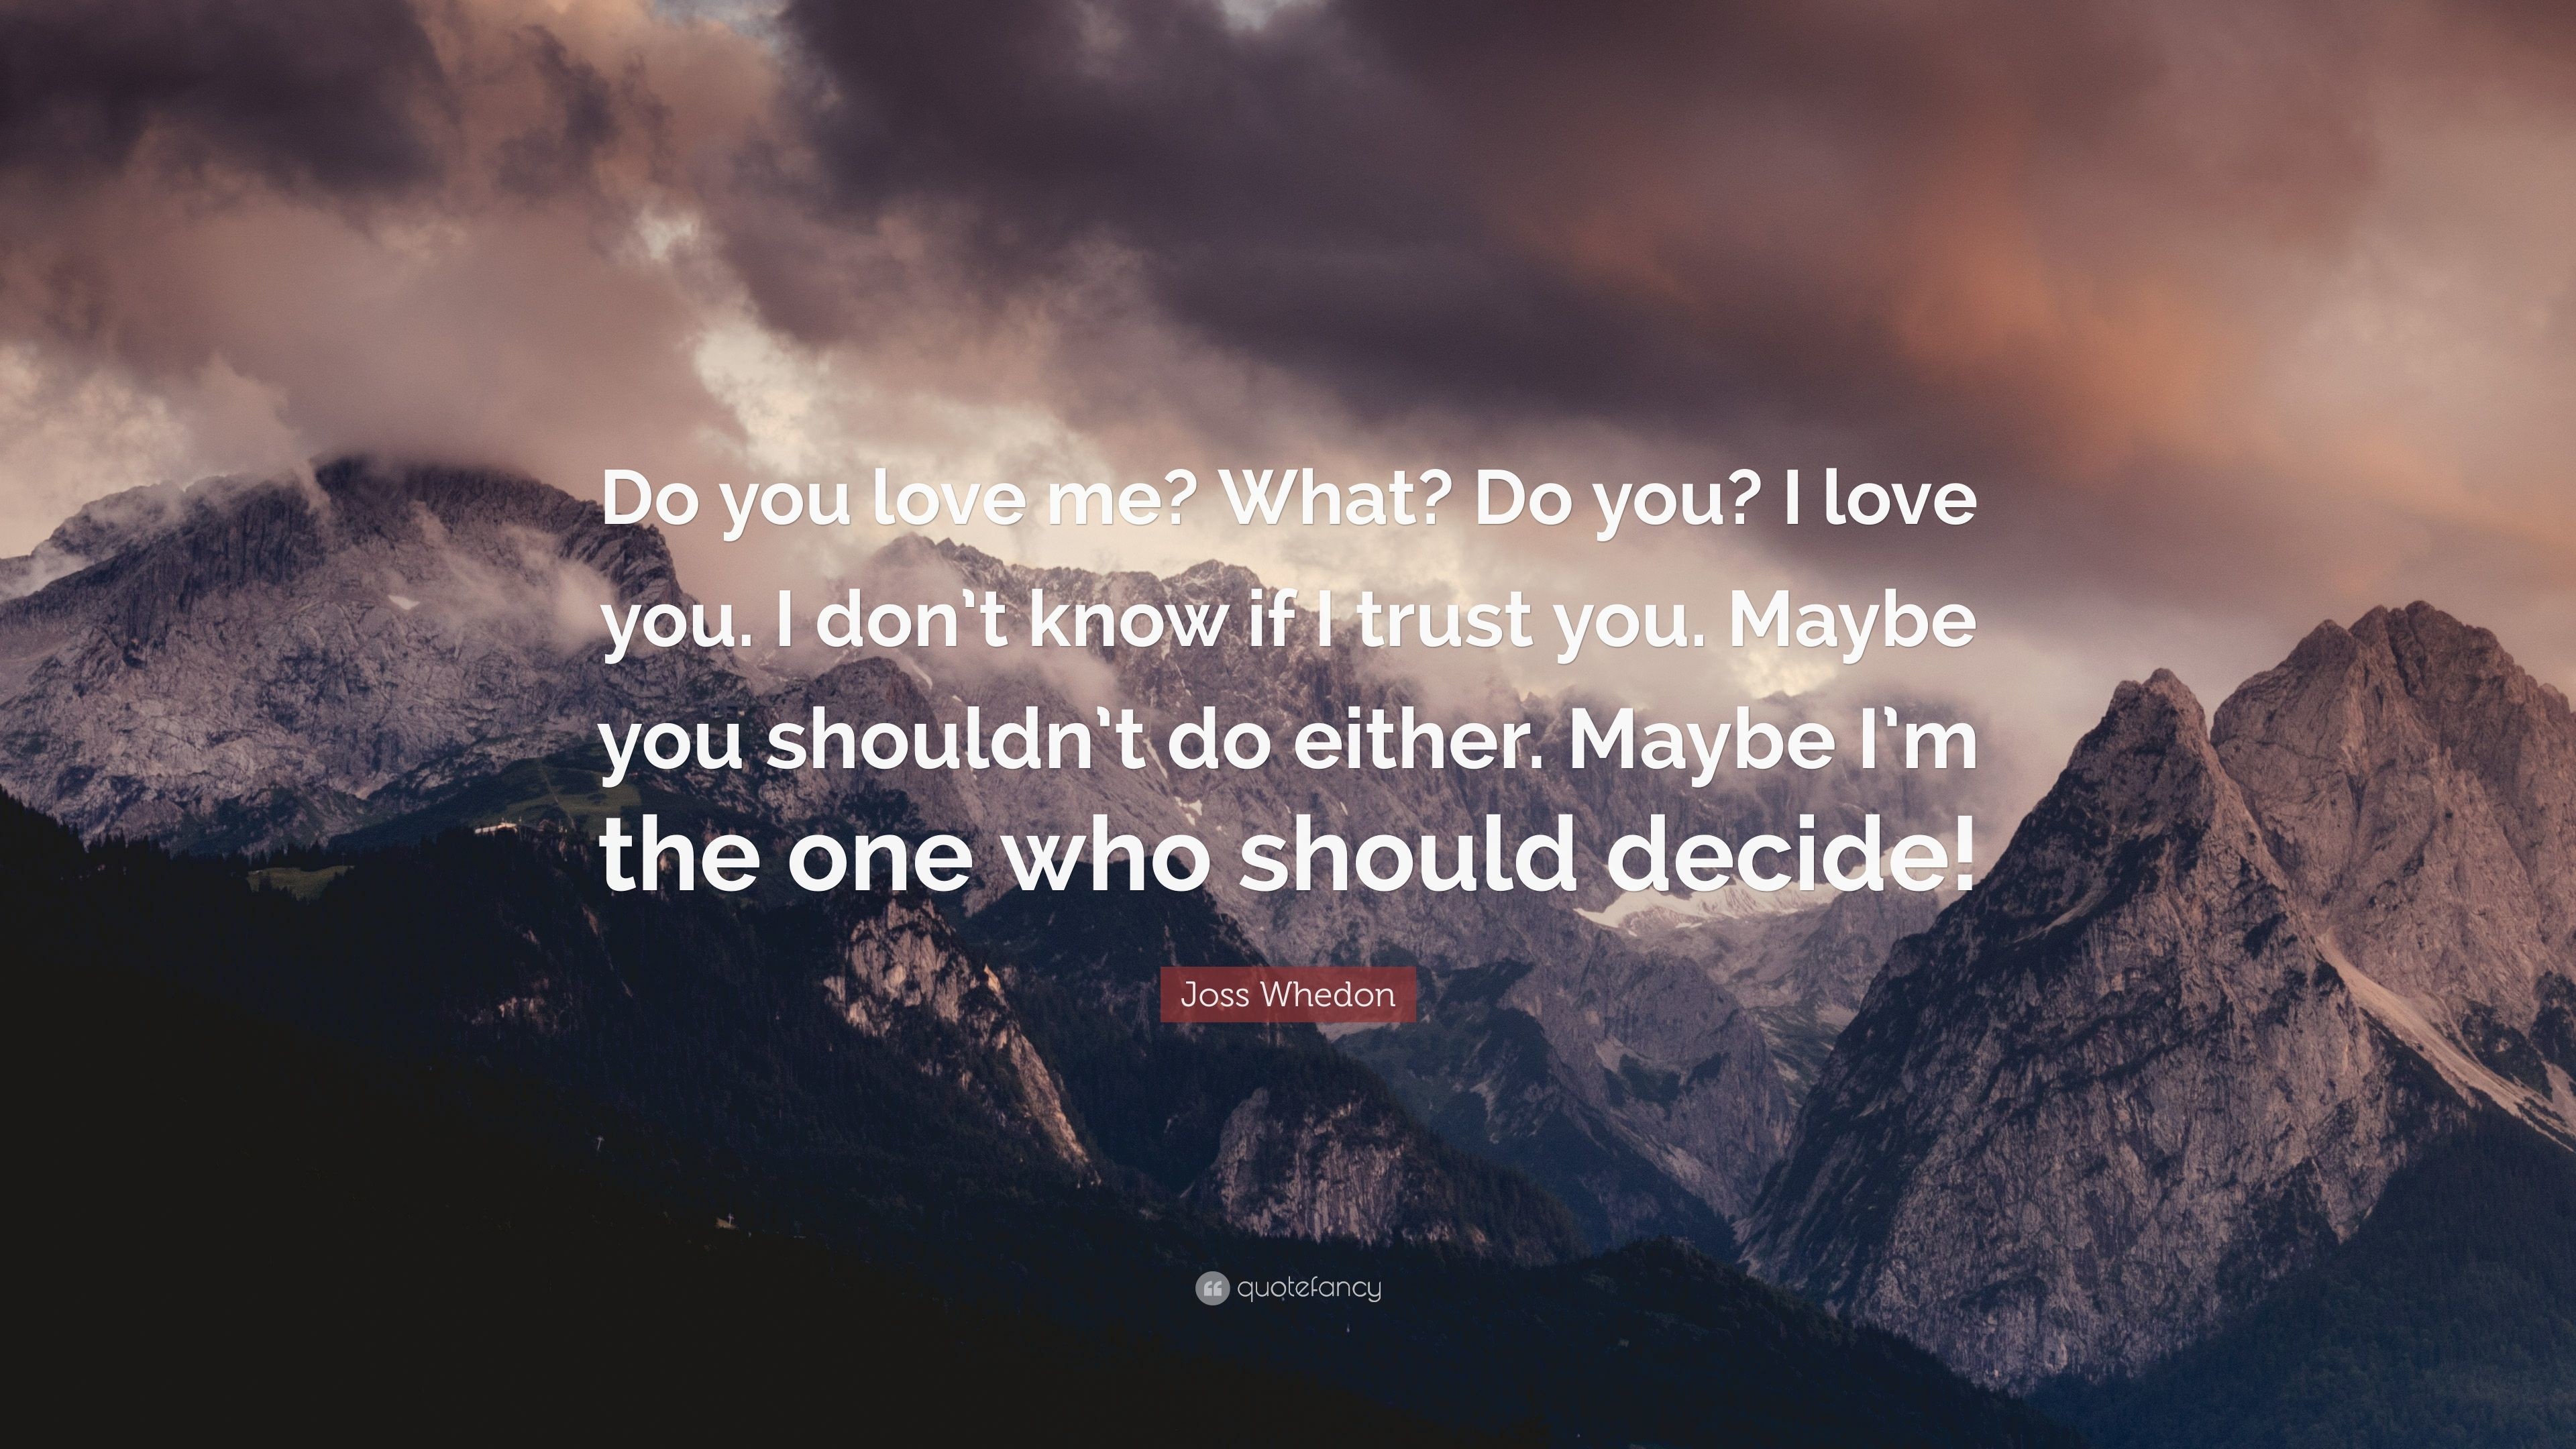 Joss Whedon Quote: "Do you love me? 